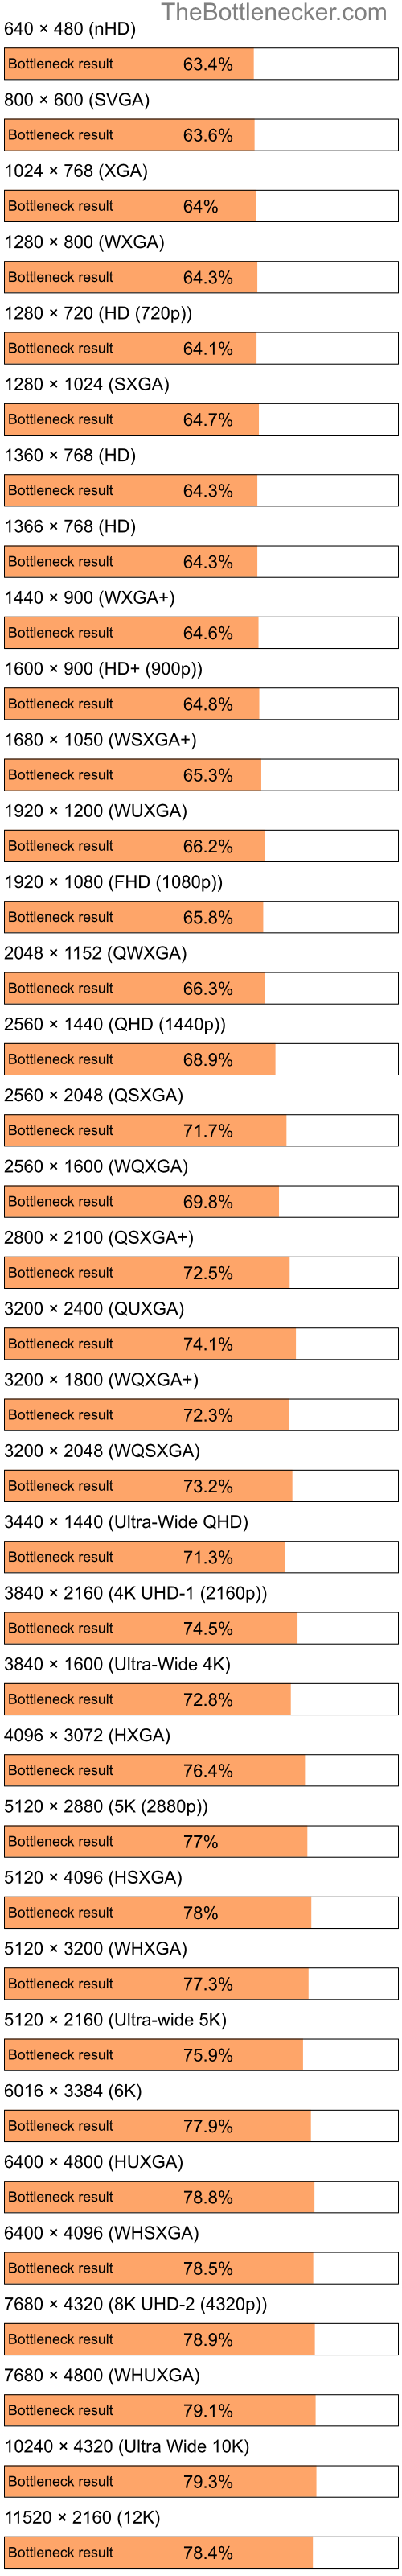 Bottleneck results by resolution for Intel Pentium 4 and NVIDIA GeForce 6200 TurboCache in Processor Intense Tasks